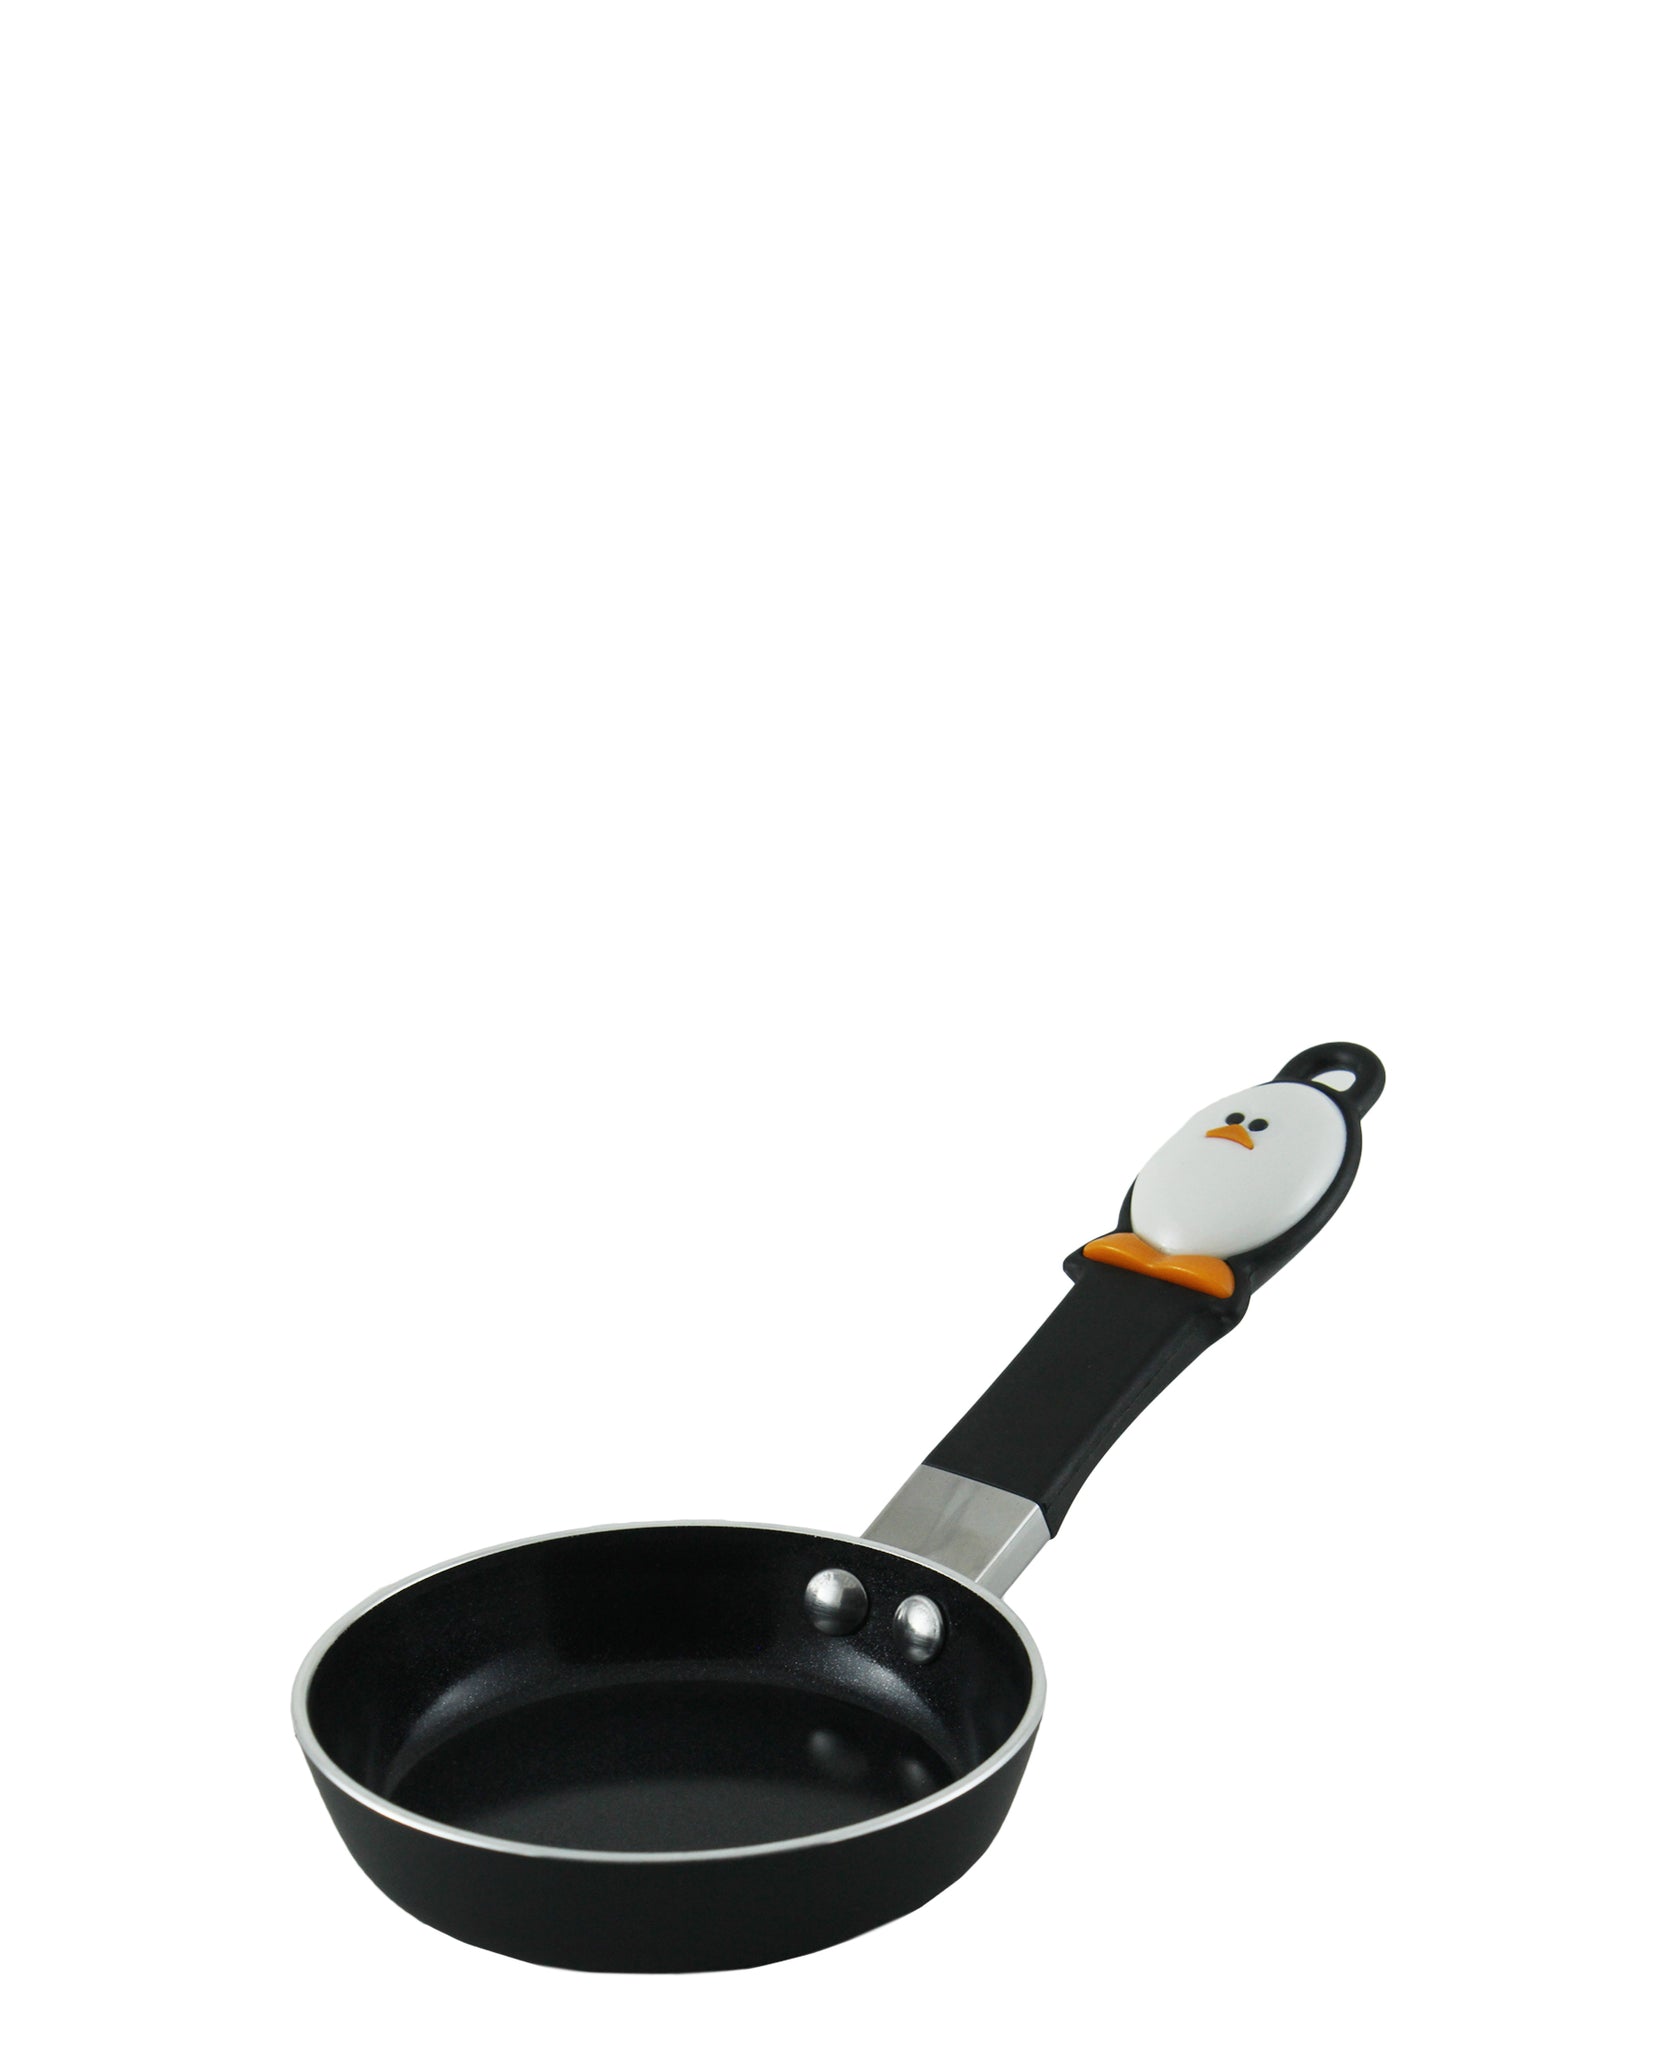 Joie Mini Nonstick Egg and Fry Pan - Black